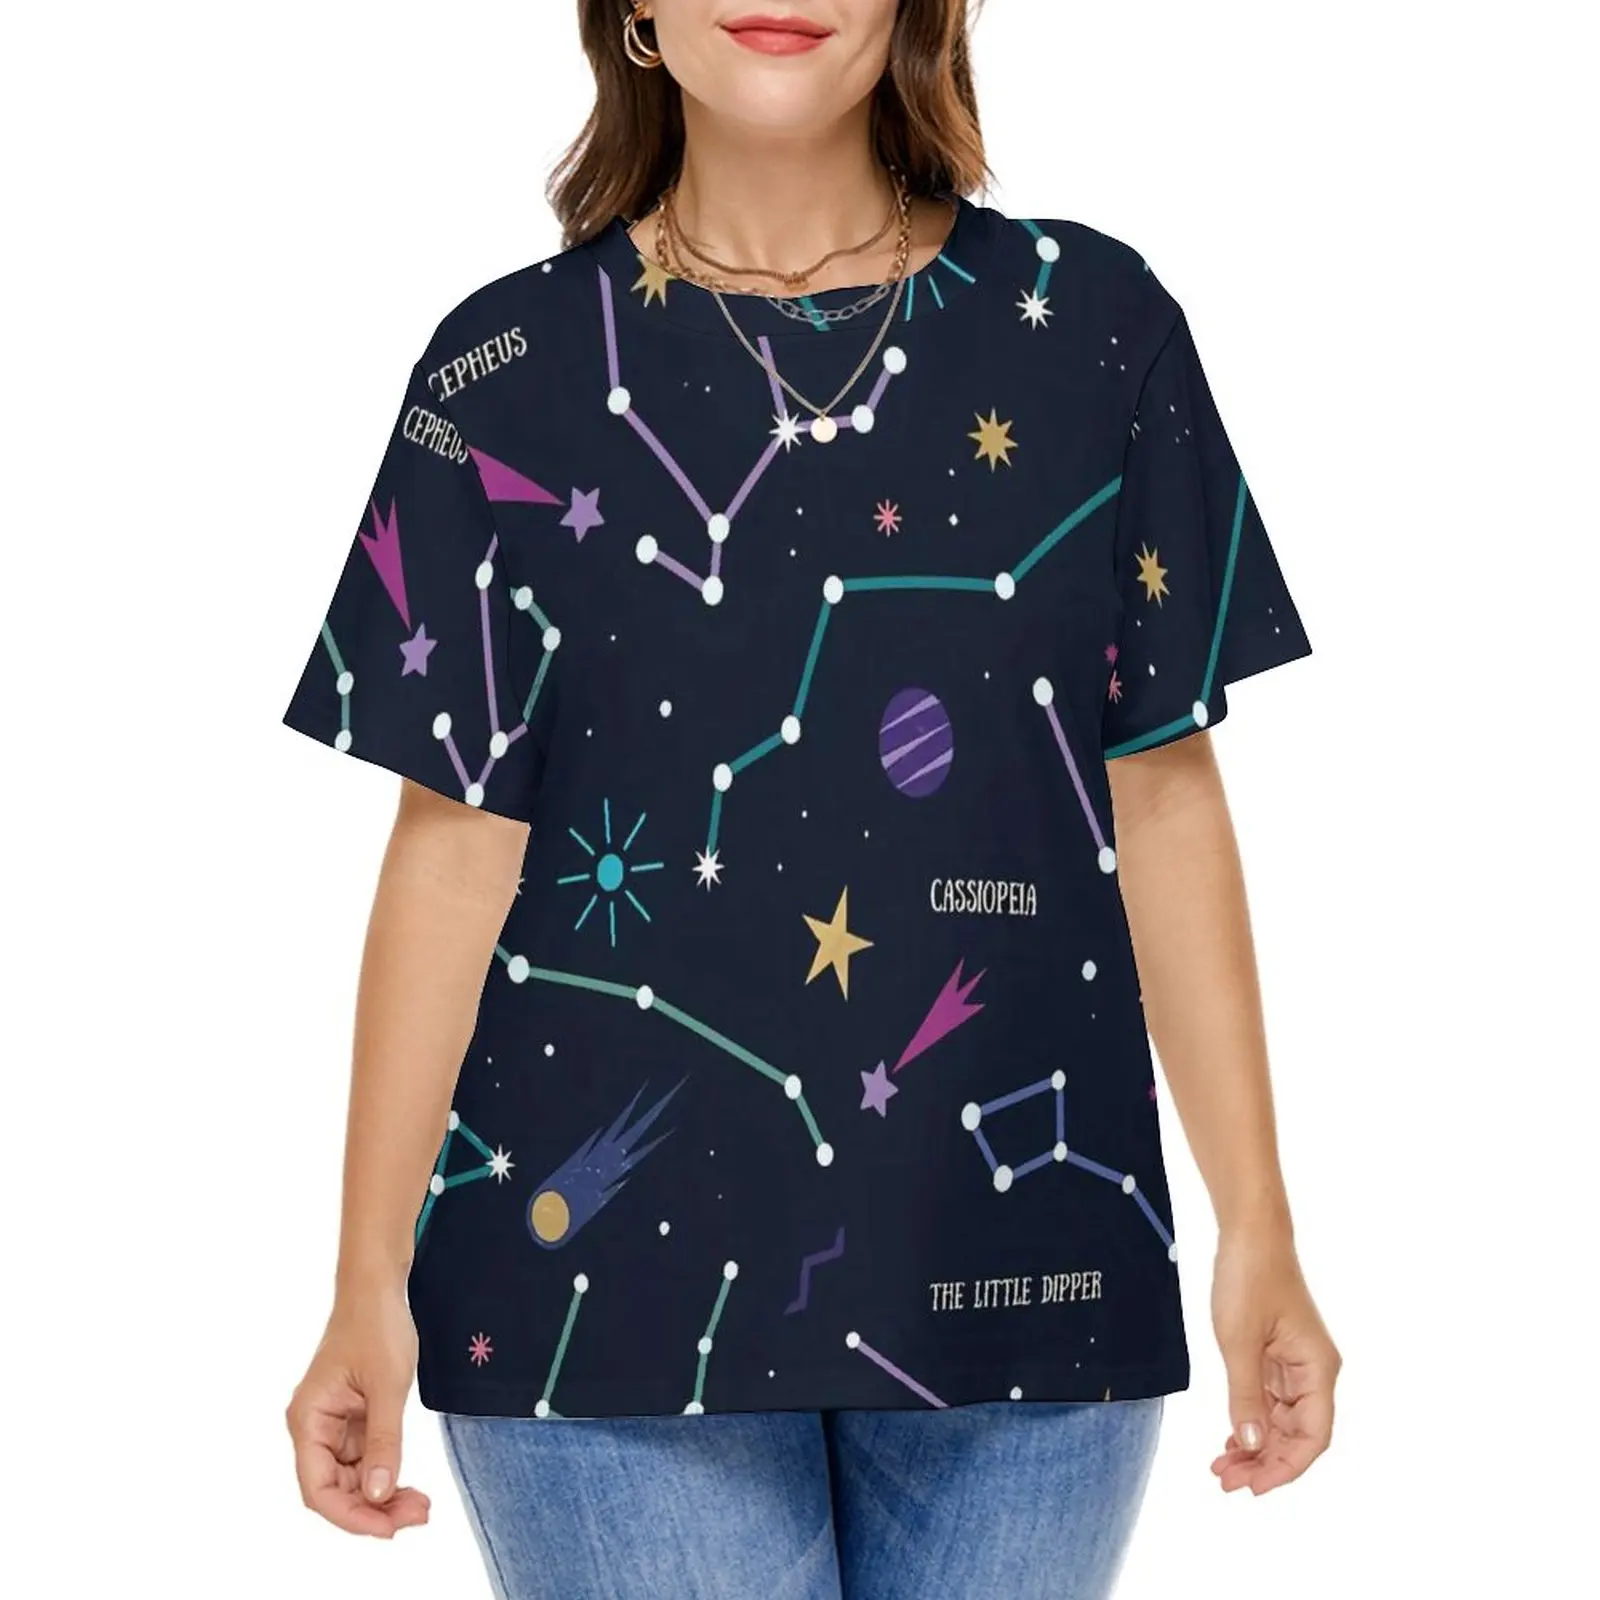 The Galaxy Stars T-Shirt Constellations And Night Sky T-Shirts Short Sleeve Casual Tshirt Beach Graphic Clothing Plus Size 8XL